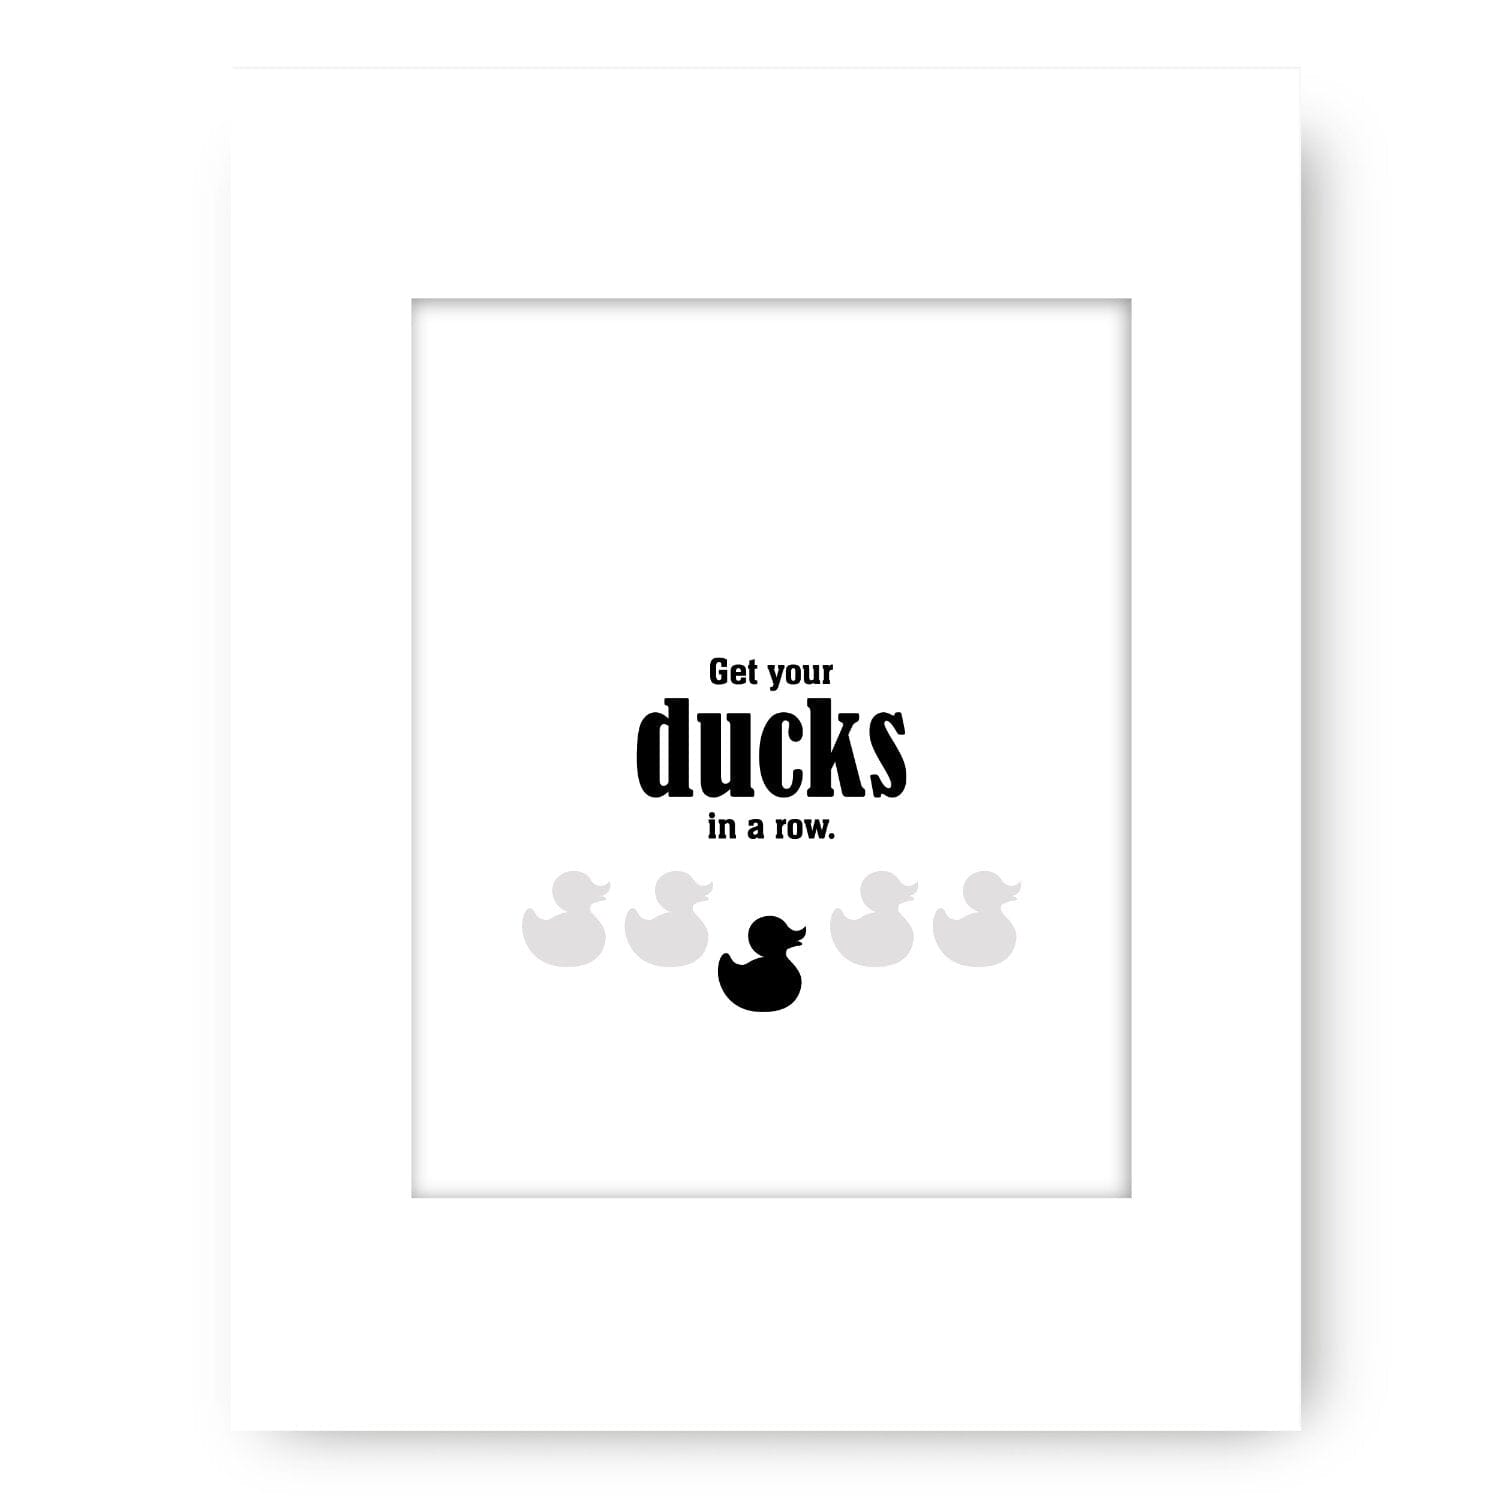 Wise and Witty Sarcastic Print - Get Your Ducks in a Row Wise and Wiseass Quotes Song Lyrics Art 8x10 White Matted Print 